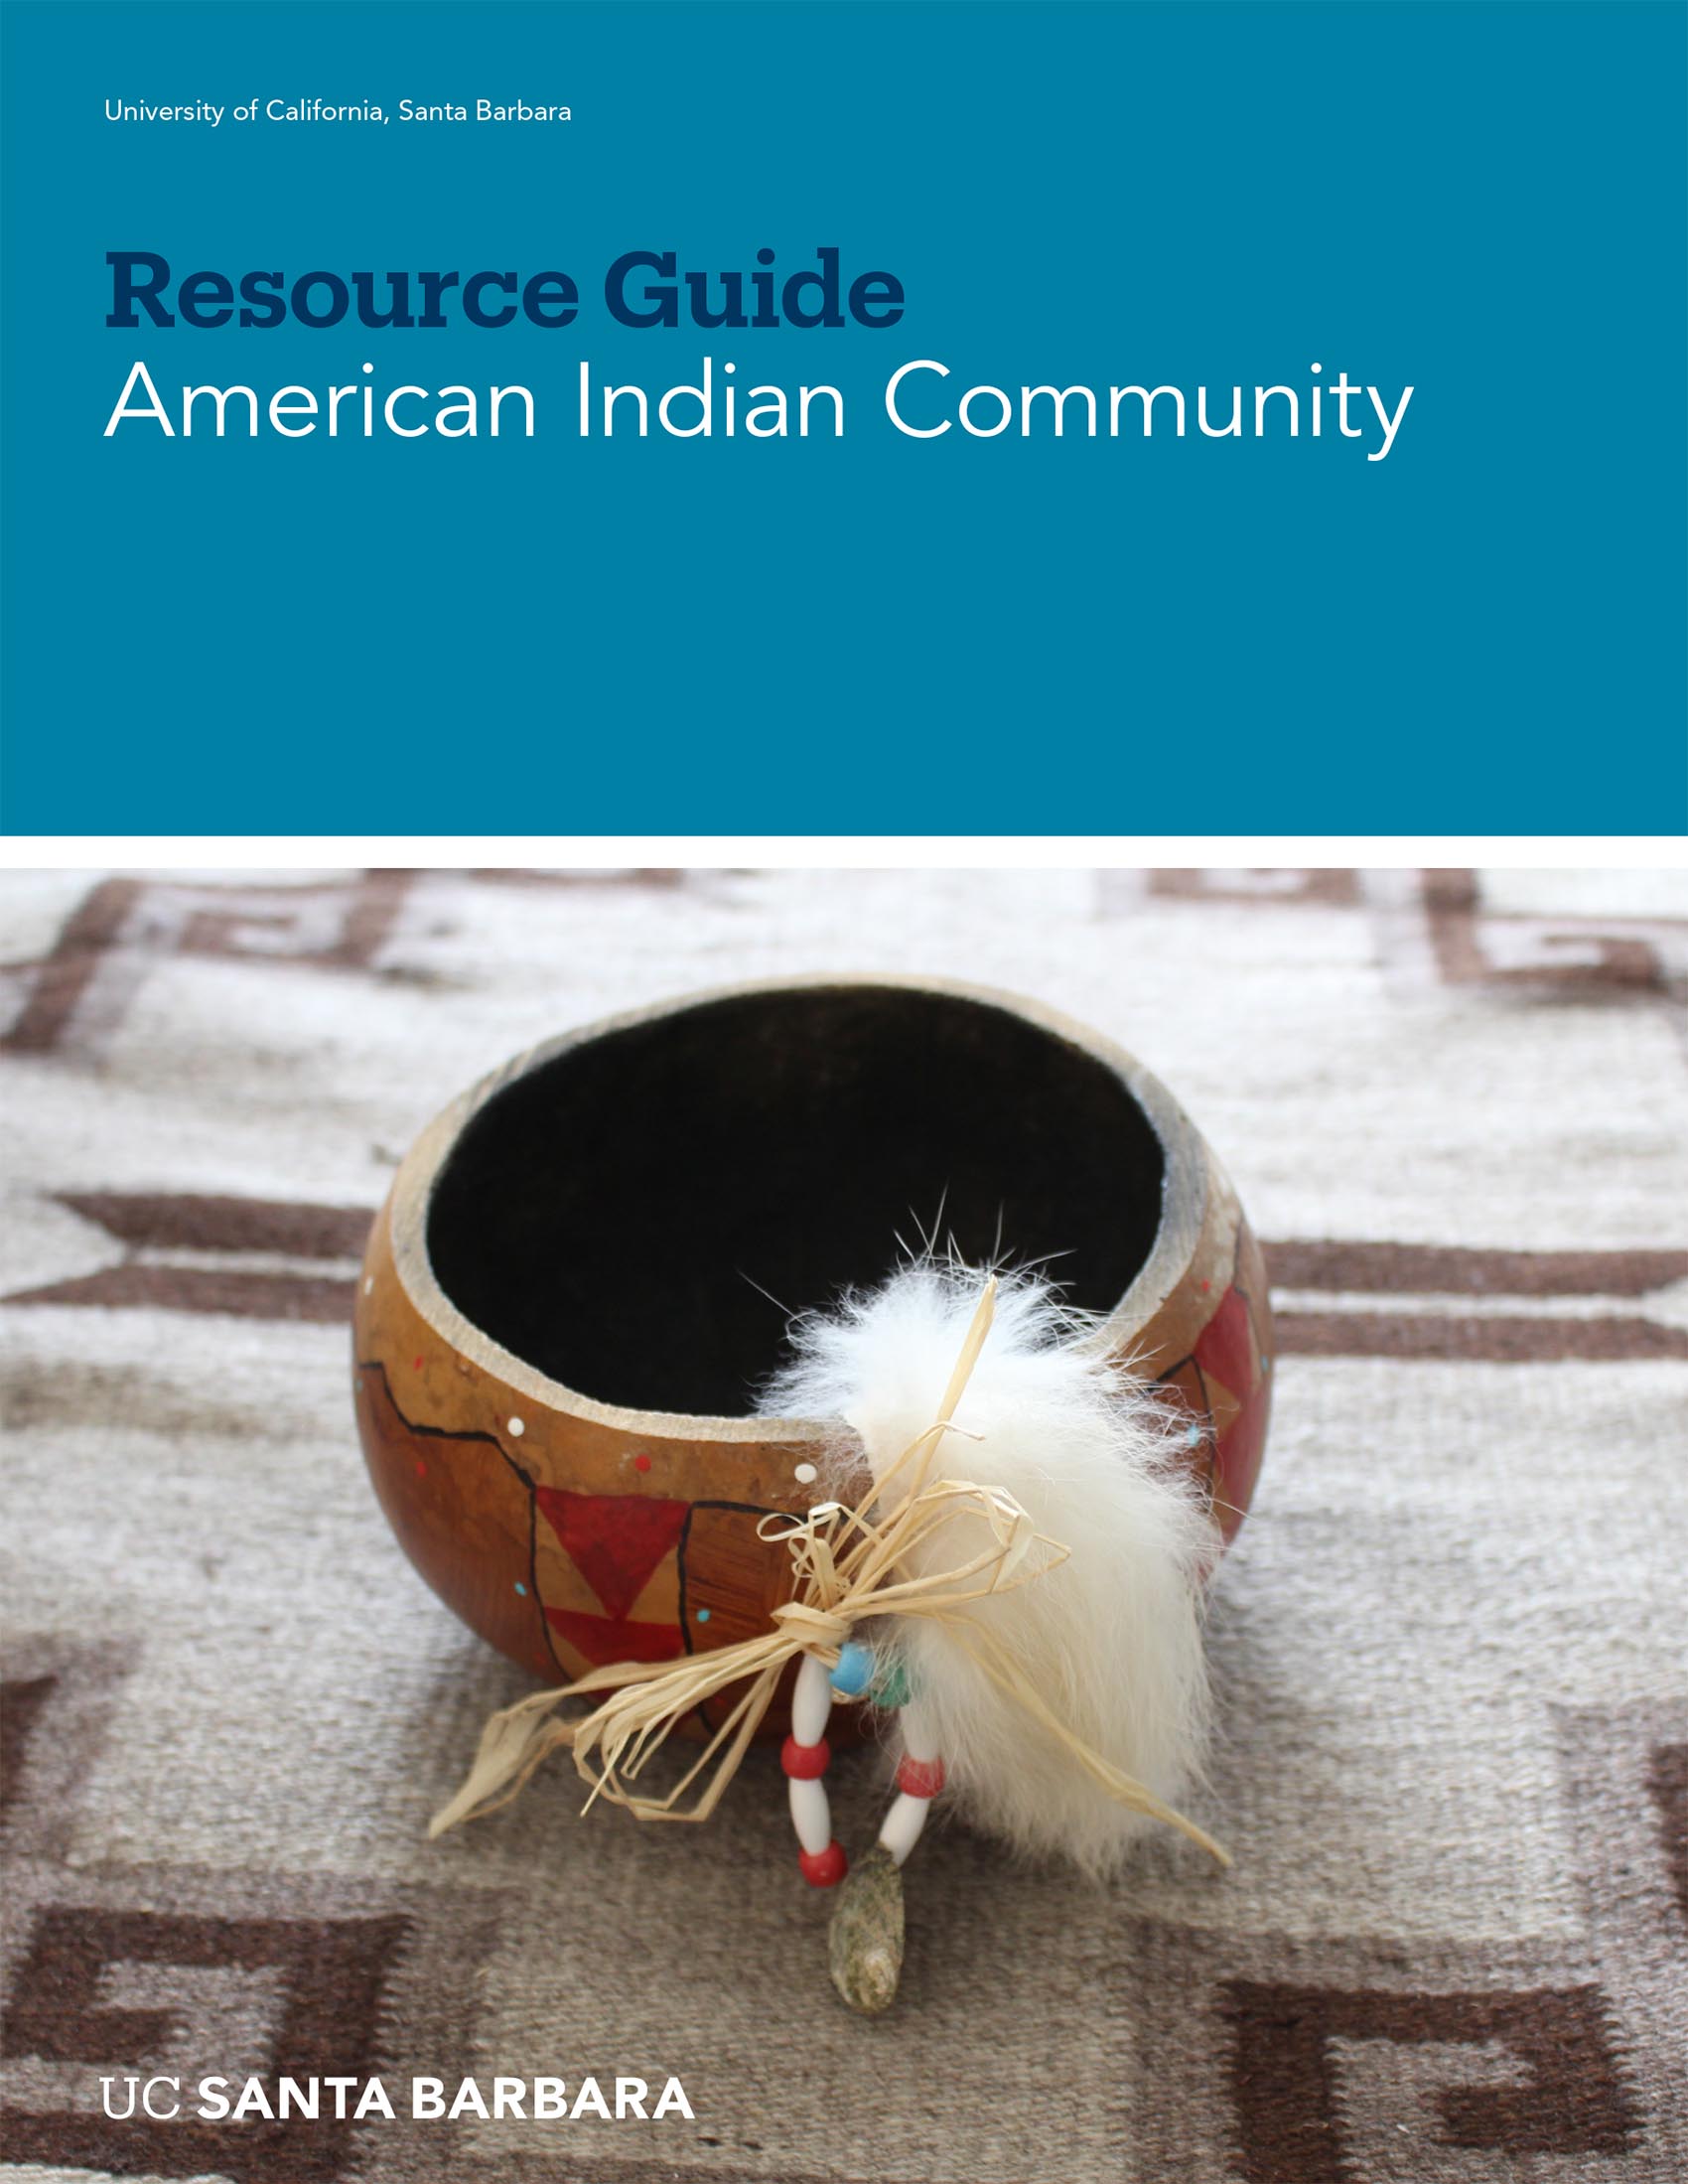 American Indian Community Guide thumbnail